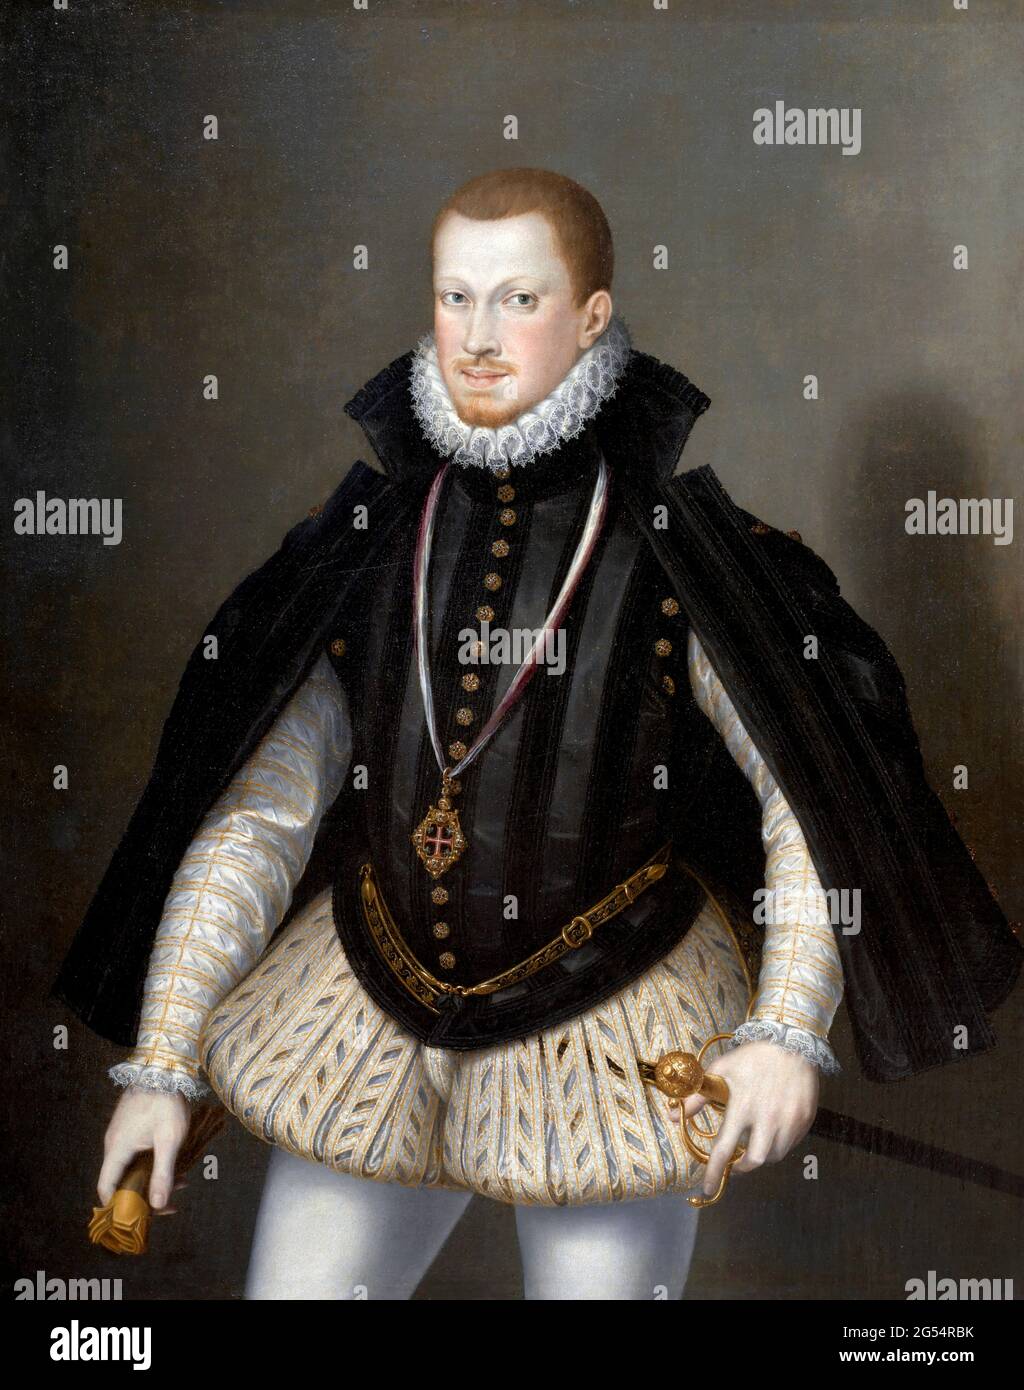 King Sebastian of Portugal  (1554-1578) by Alonso Sánchez Coello, oil on canvas, c. 1580 Stock Photo